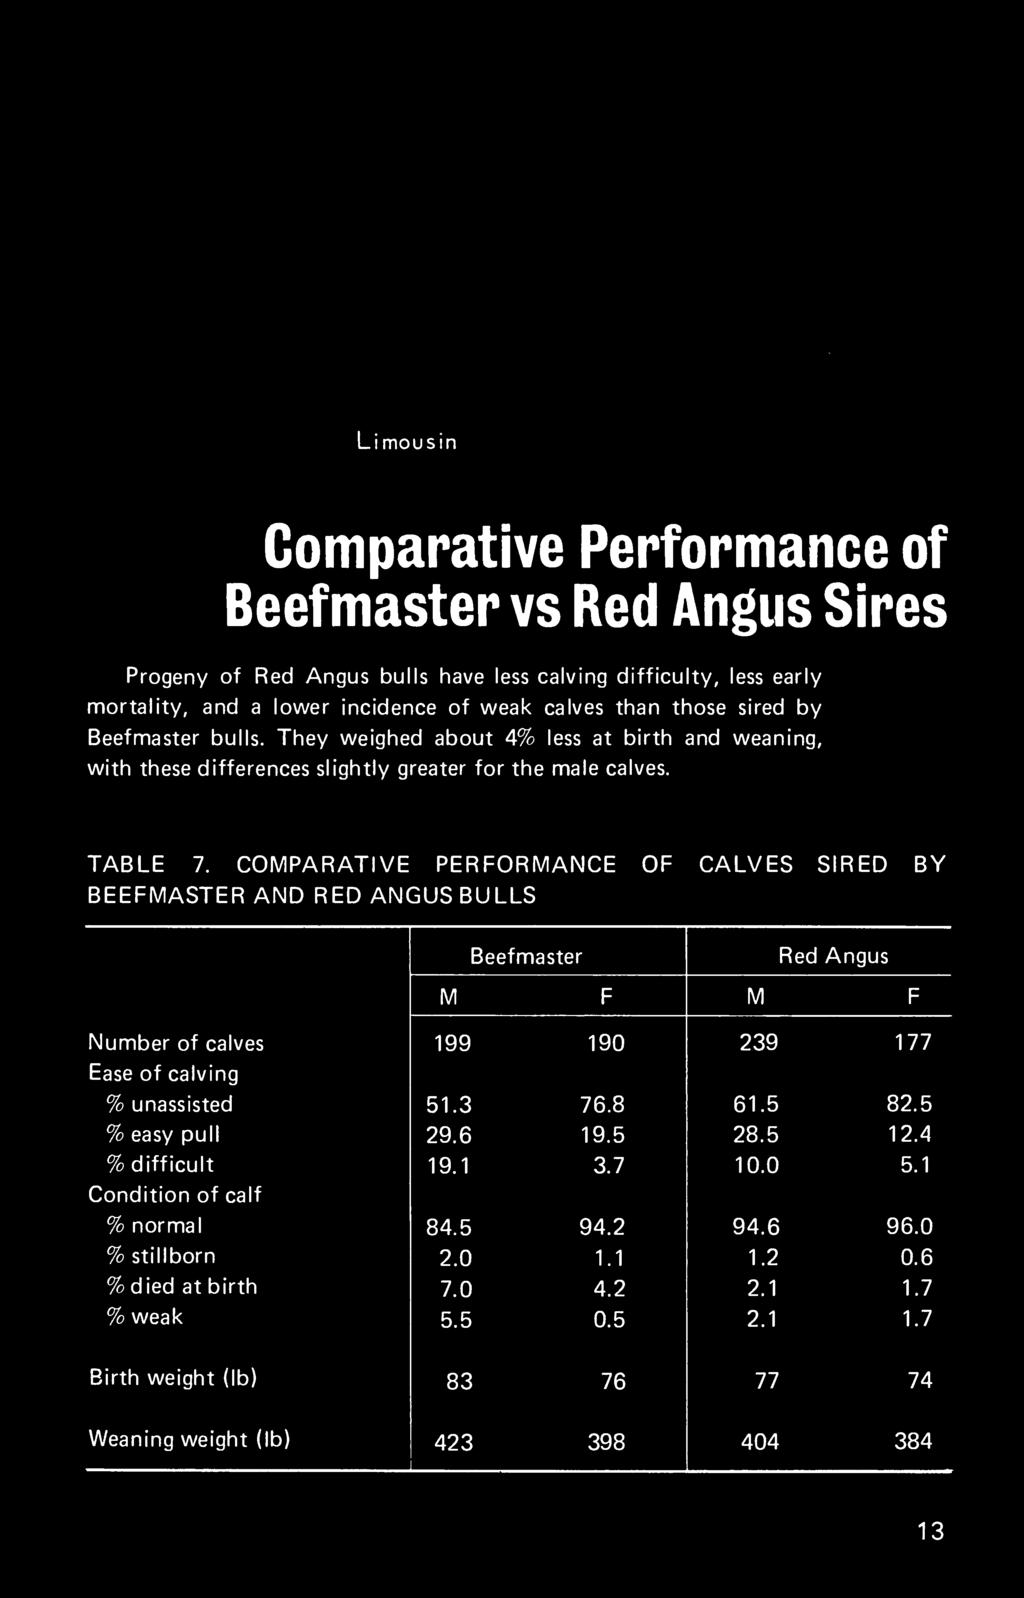 COMPARATIVE PERFORMANCE OF CALVES SIRED BY BEEFMASTER AND RED ANGUS BULLS Beefmaster Red A ngus M F M F Number of calves 199 190 239 177 Ease of calving % unassisted 51.3 76.8 61.5 82.